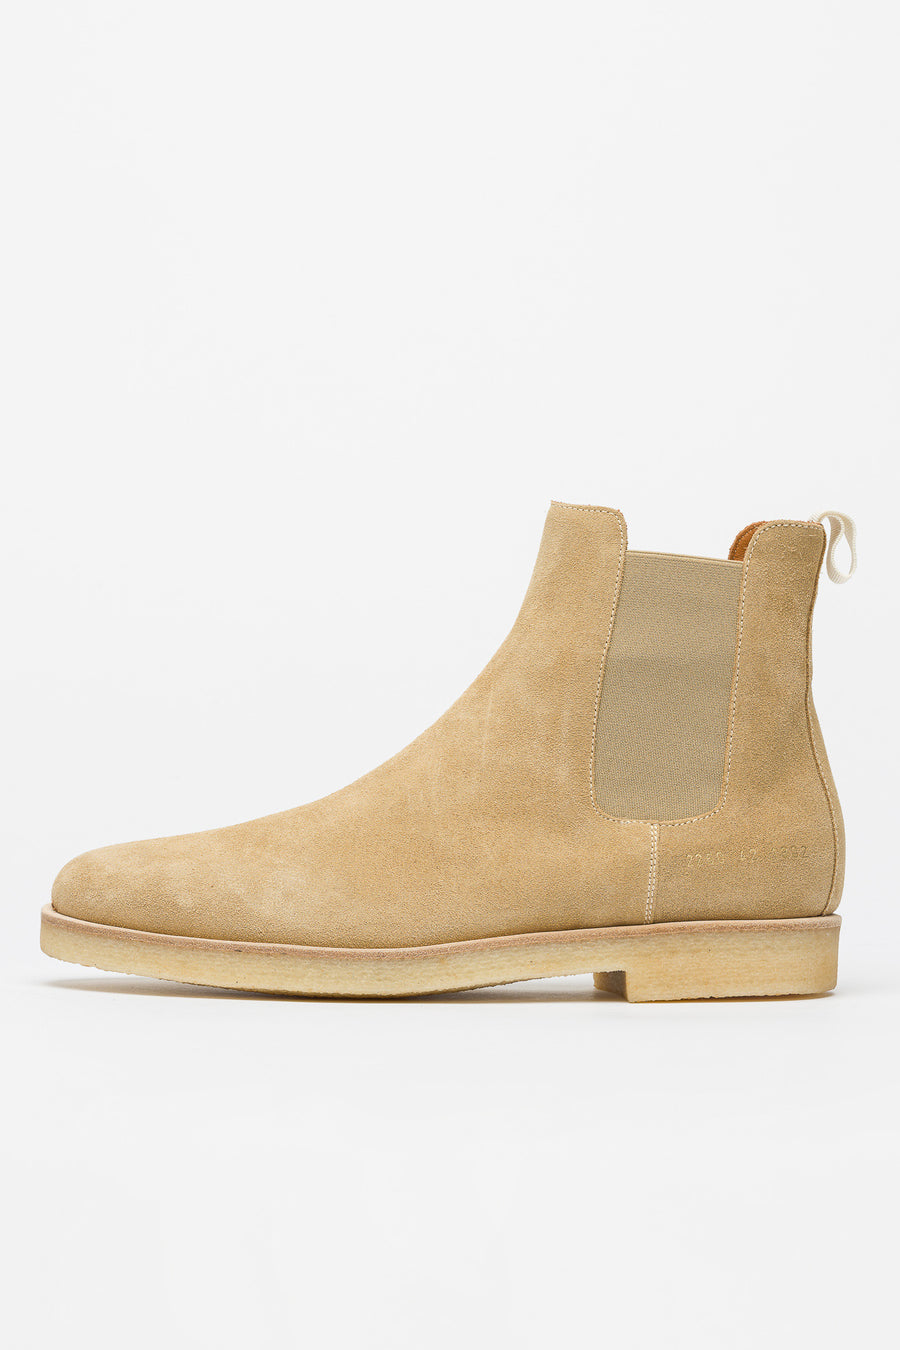 tan suede chelsea boots